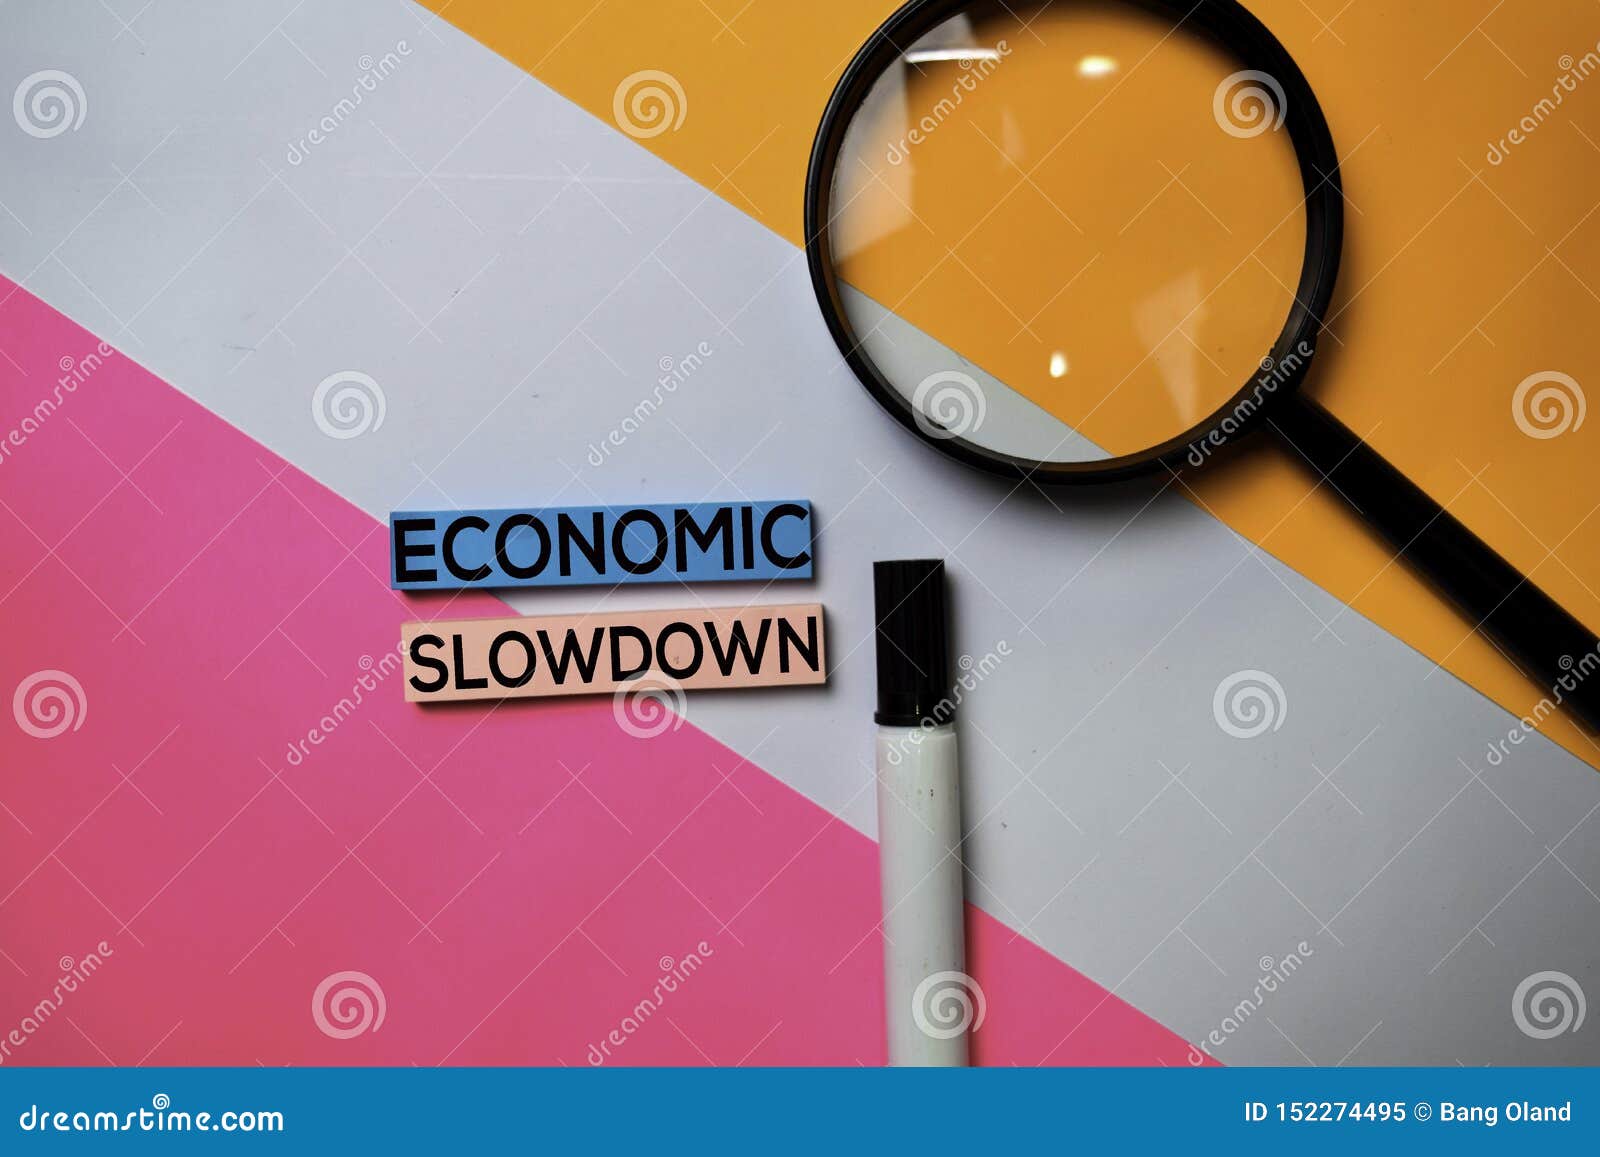 economic slowdown text on sticky notes with color office desk concept